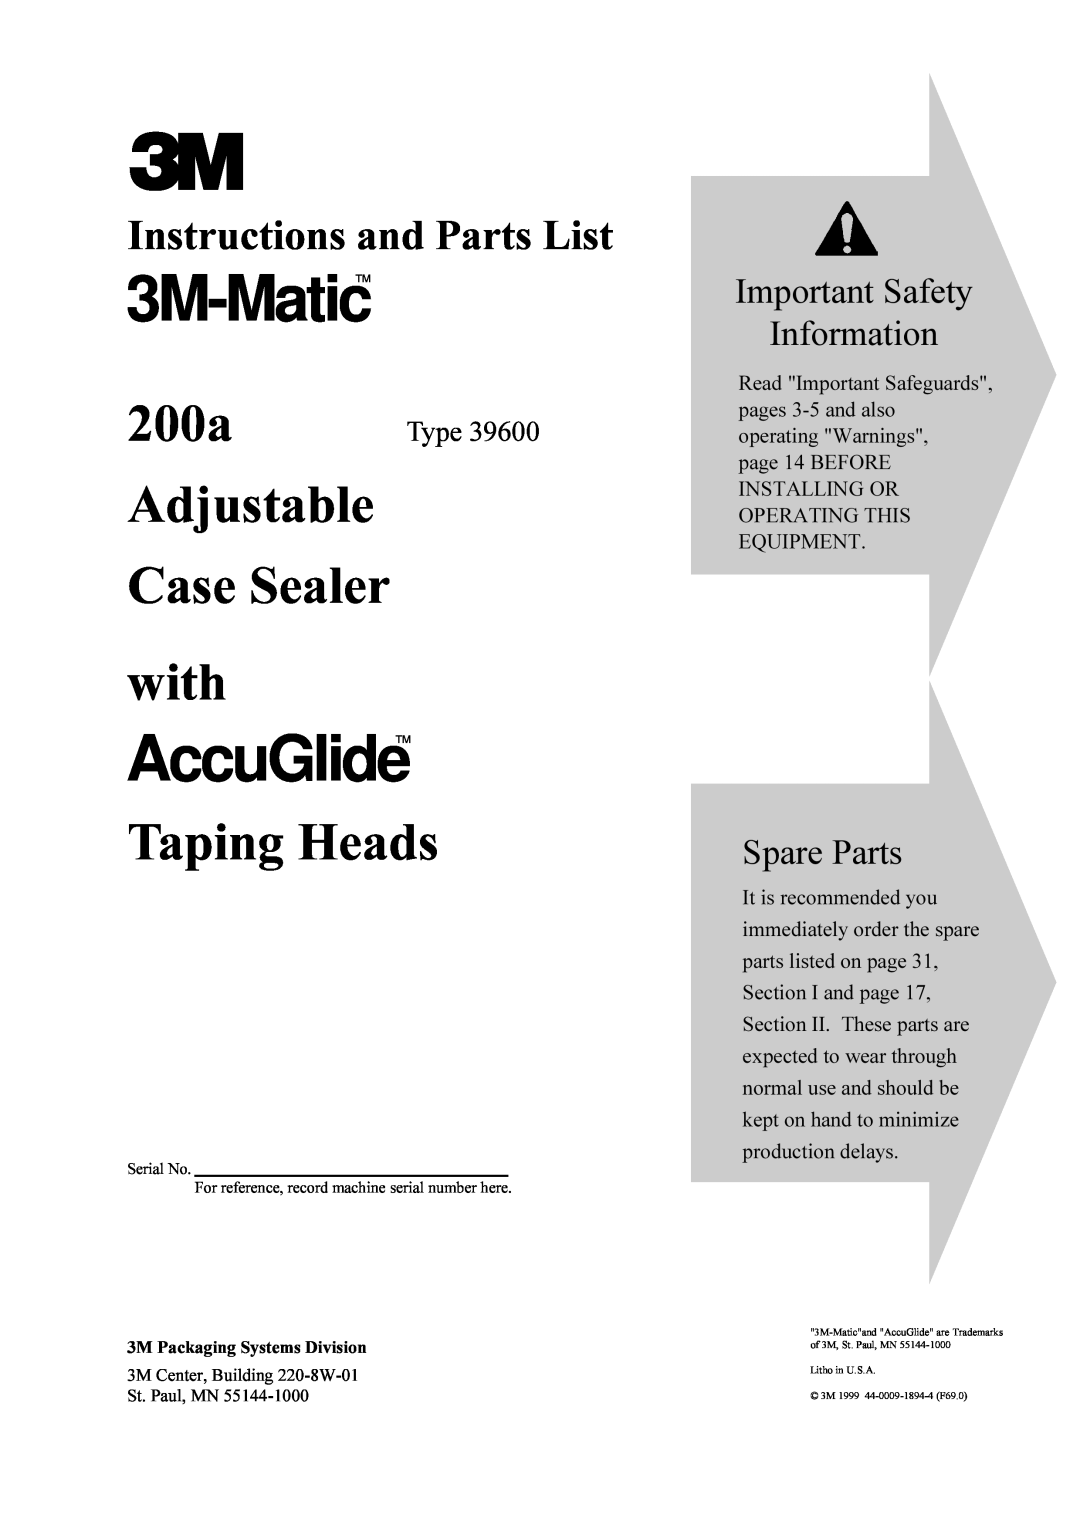 3M 200a manual Instructions and Parts List, 3M-Matic, AccuGlideTM, Adjustable, with, Taping Heads, Case Sealer 